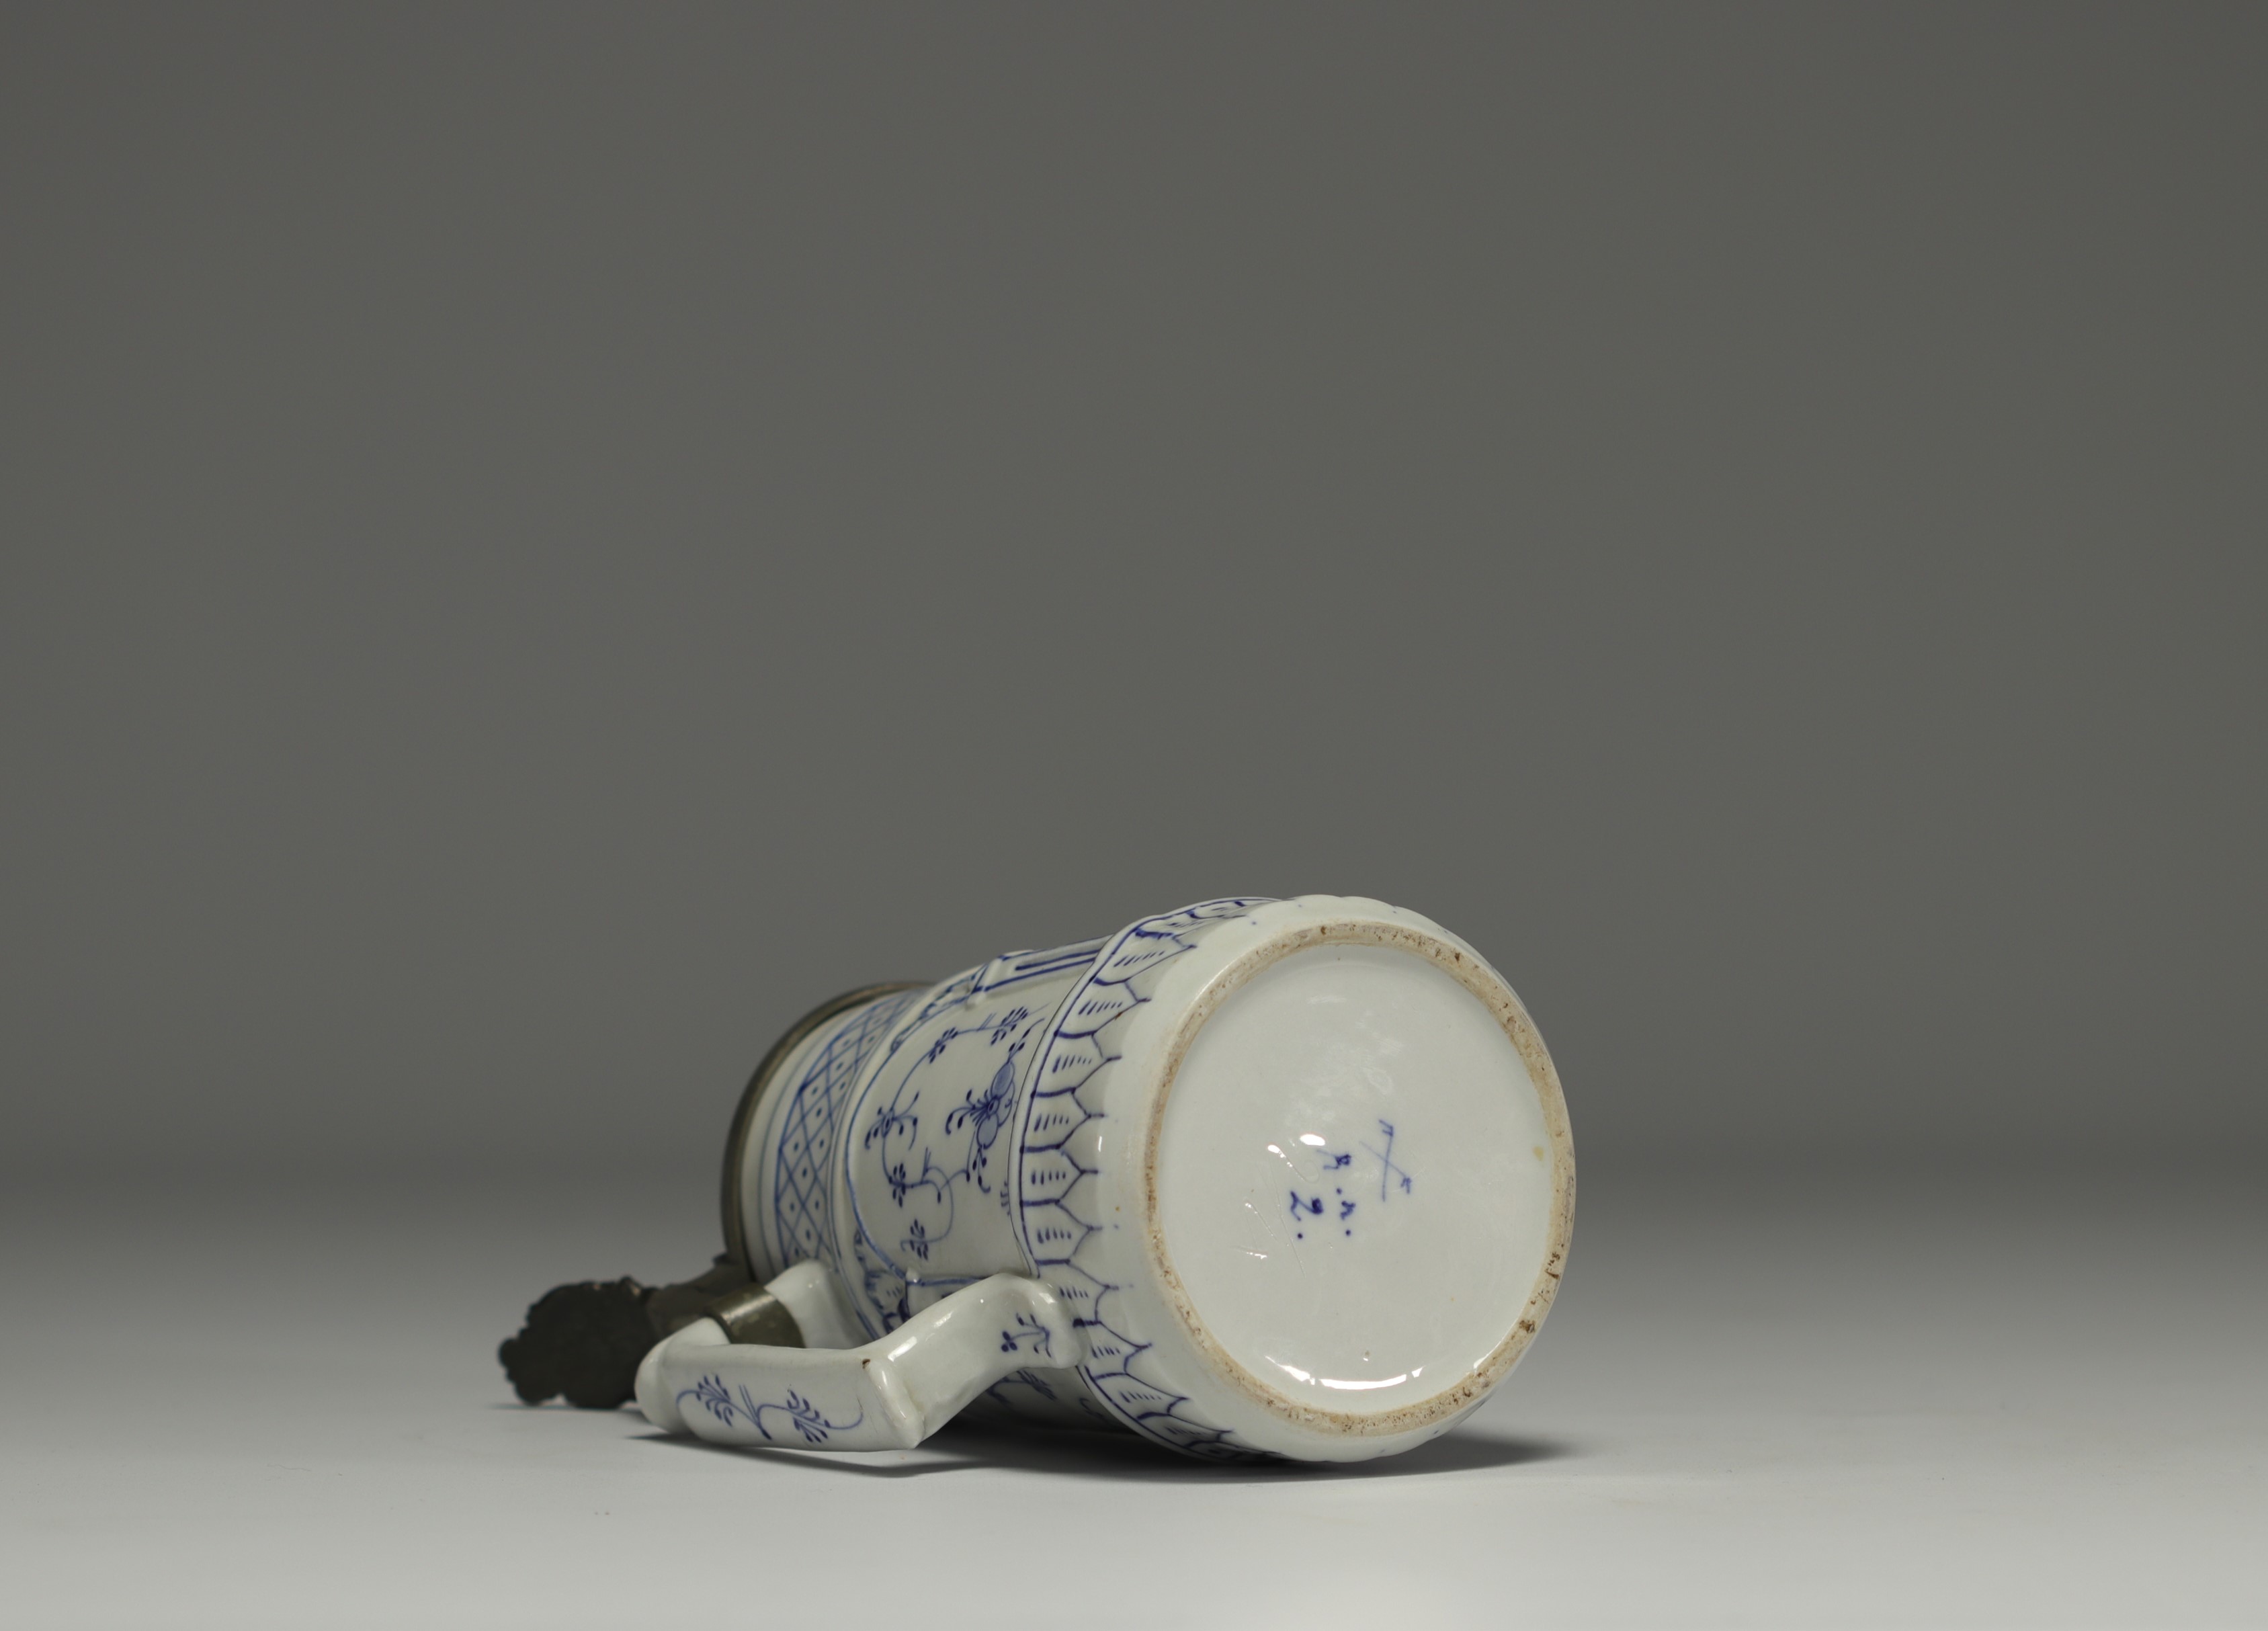 Rauenstein porcelain jug with white and blue decoration, pewter frame, 19th century. - Image 3 of 3